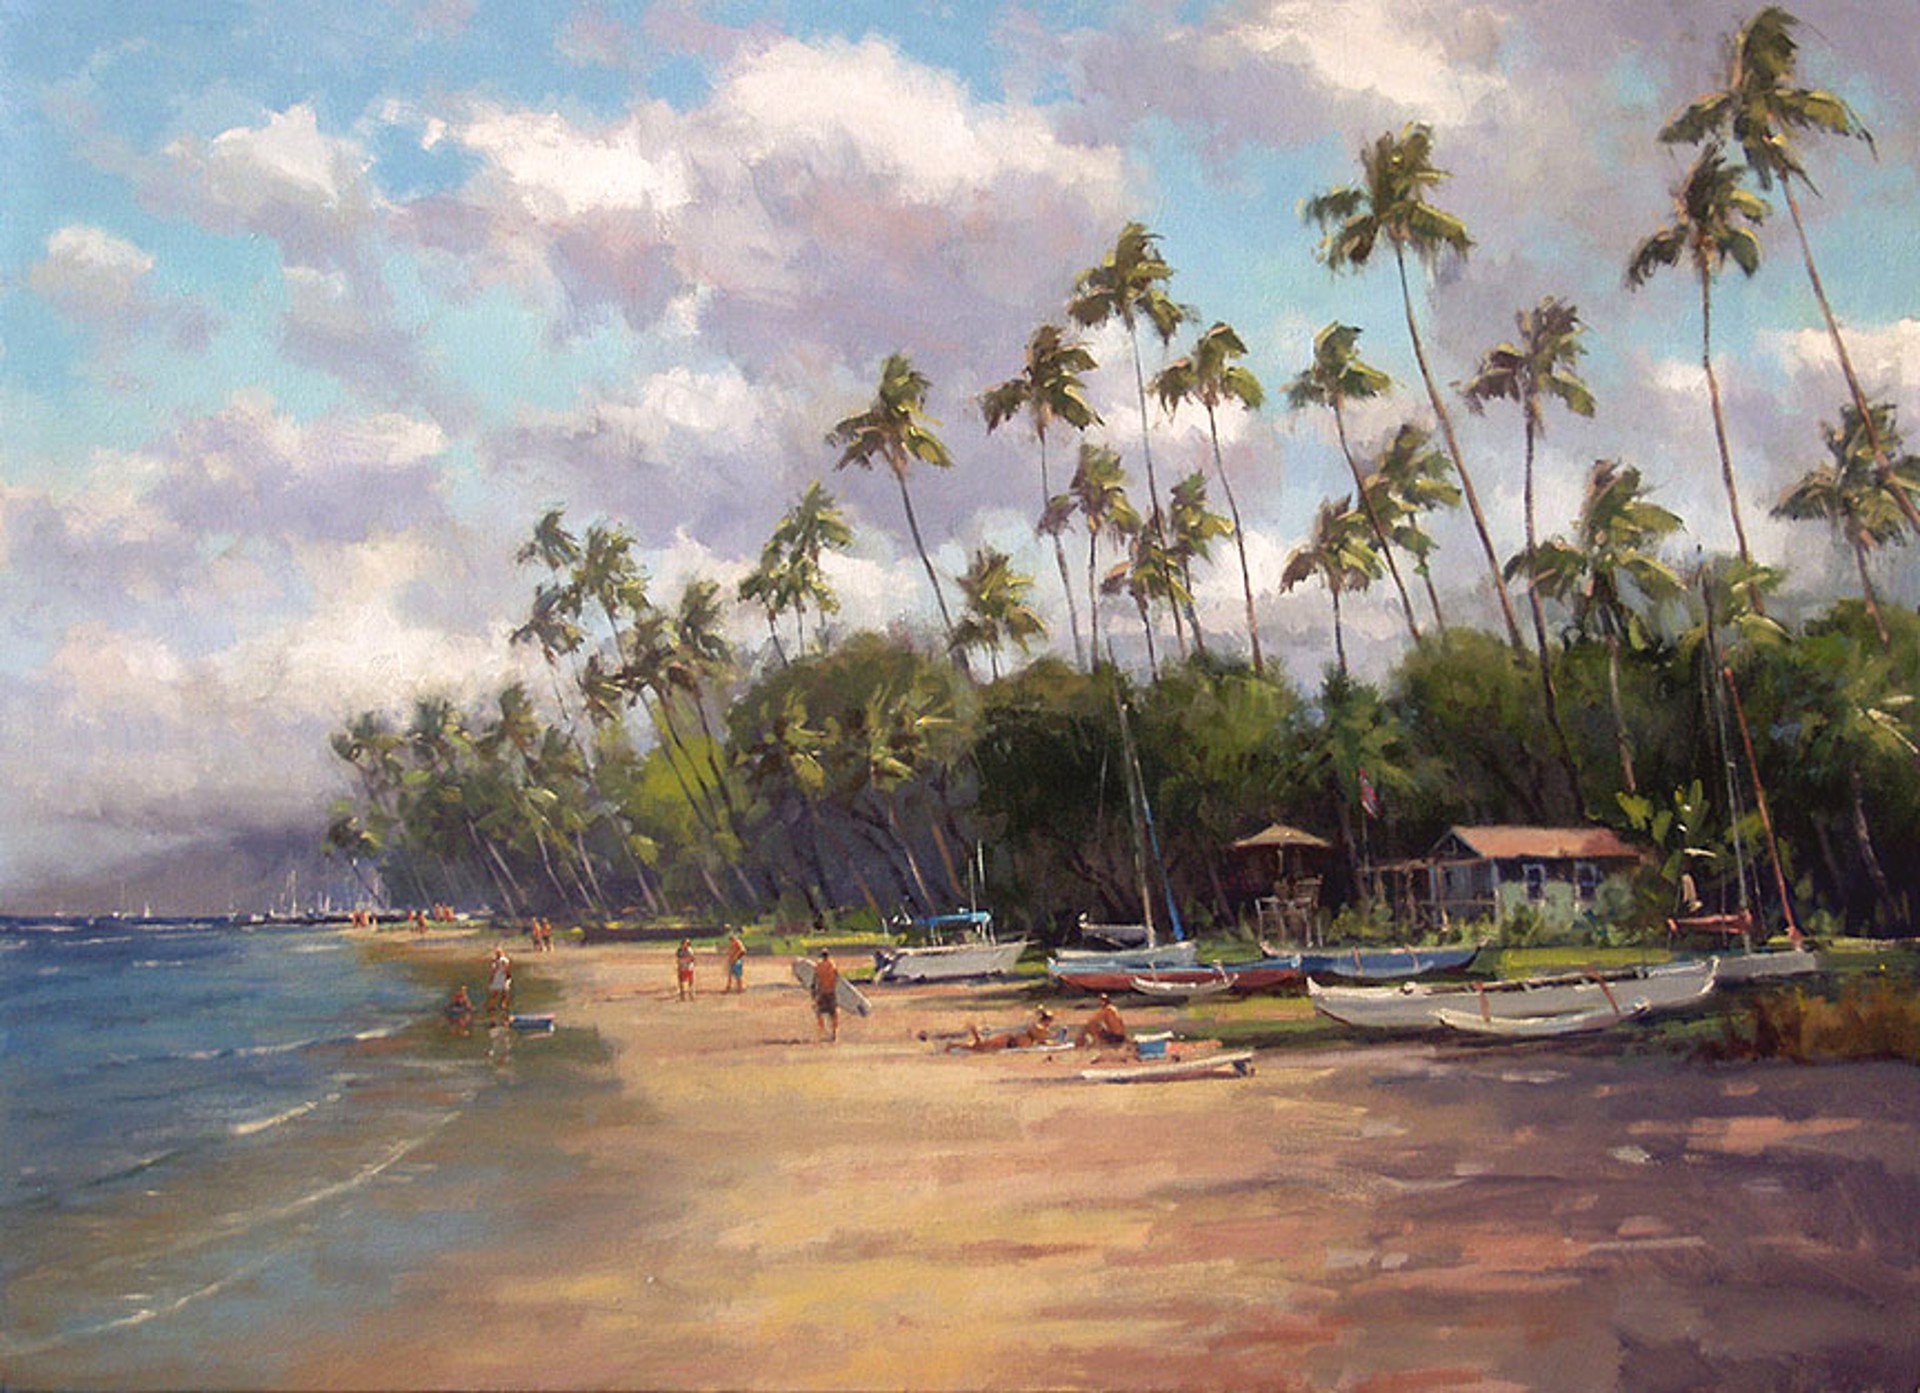 Fun, Maui Style - SOLD by Commission Possibilities / Previously Sold ZX